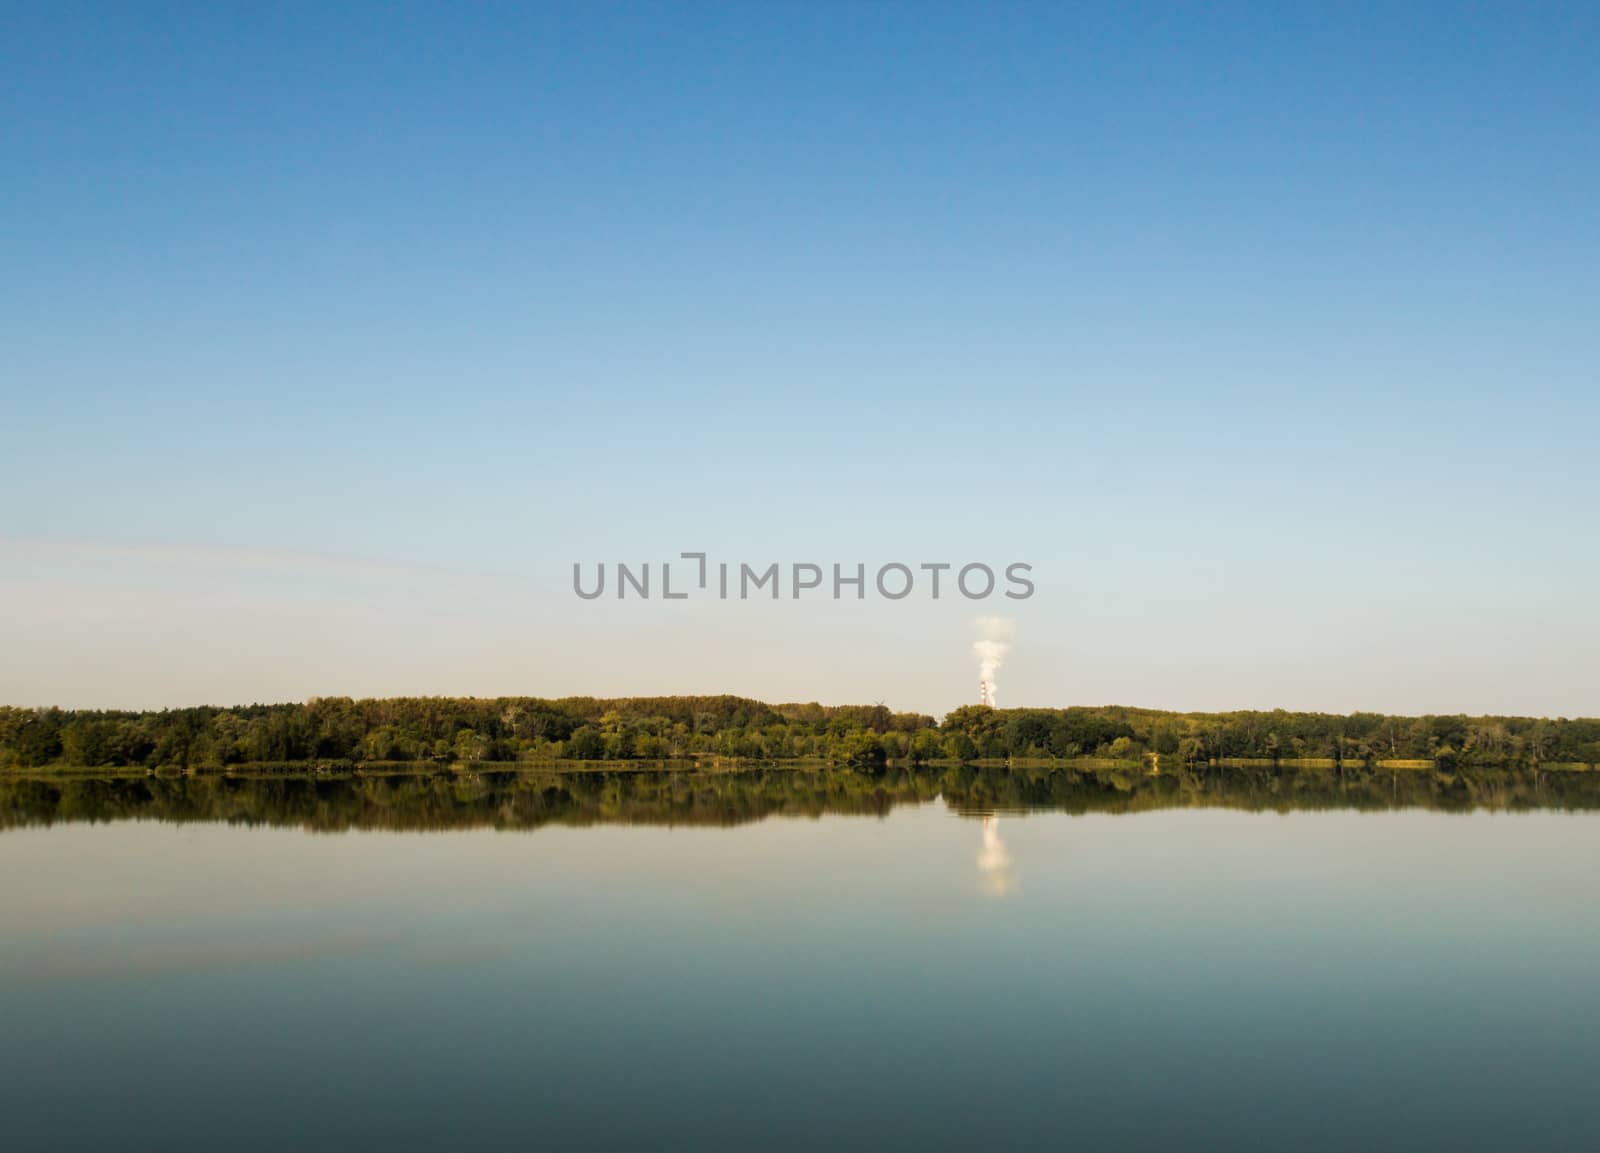 Lanscape image of a lake on a bright cloudless day with forest and a factory on lake's far end